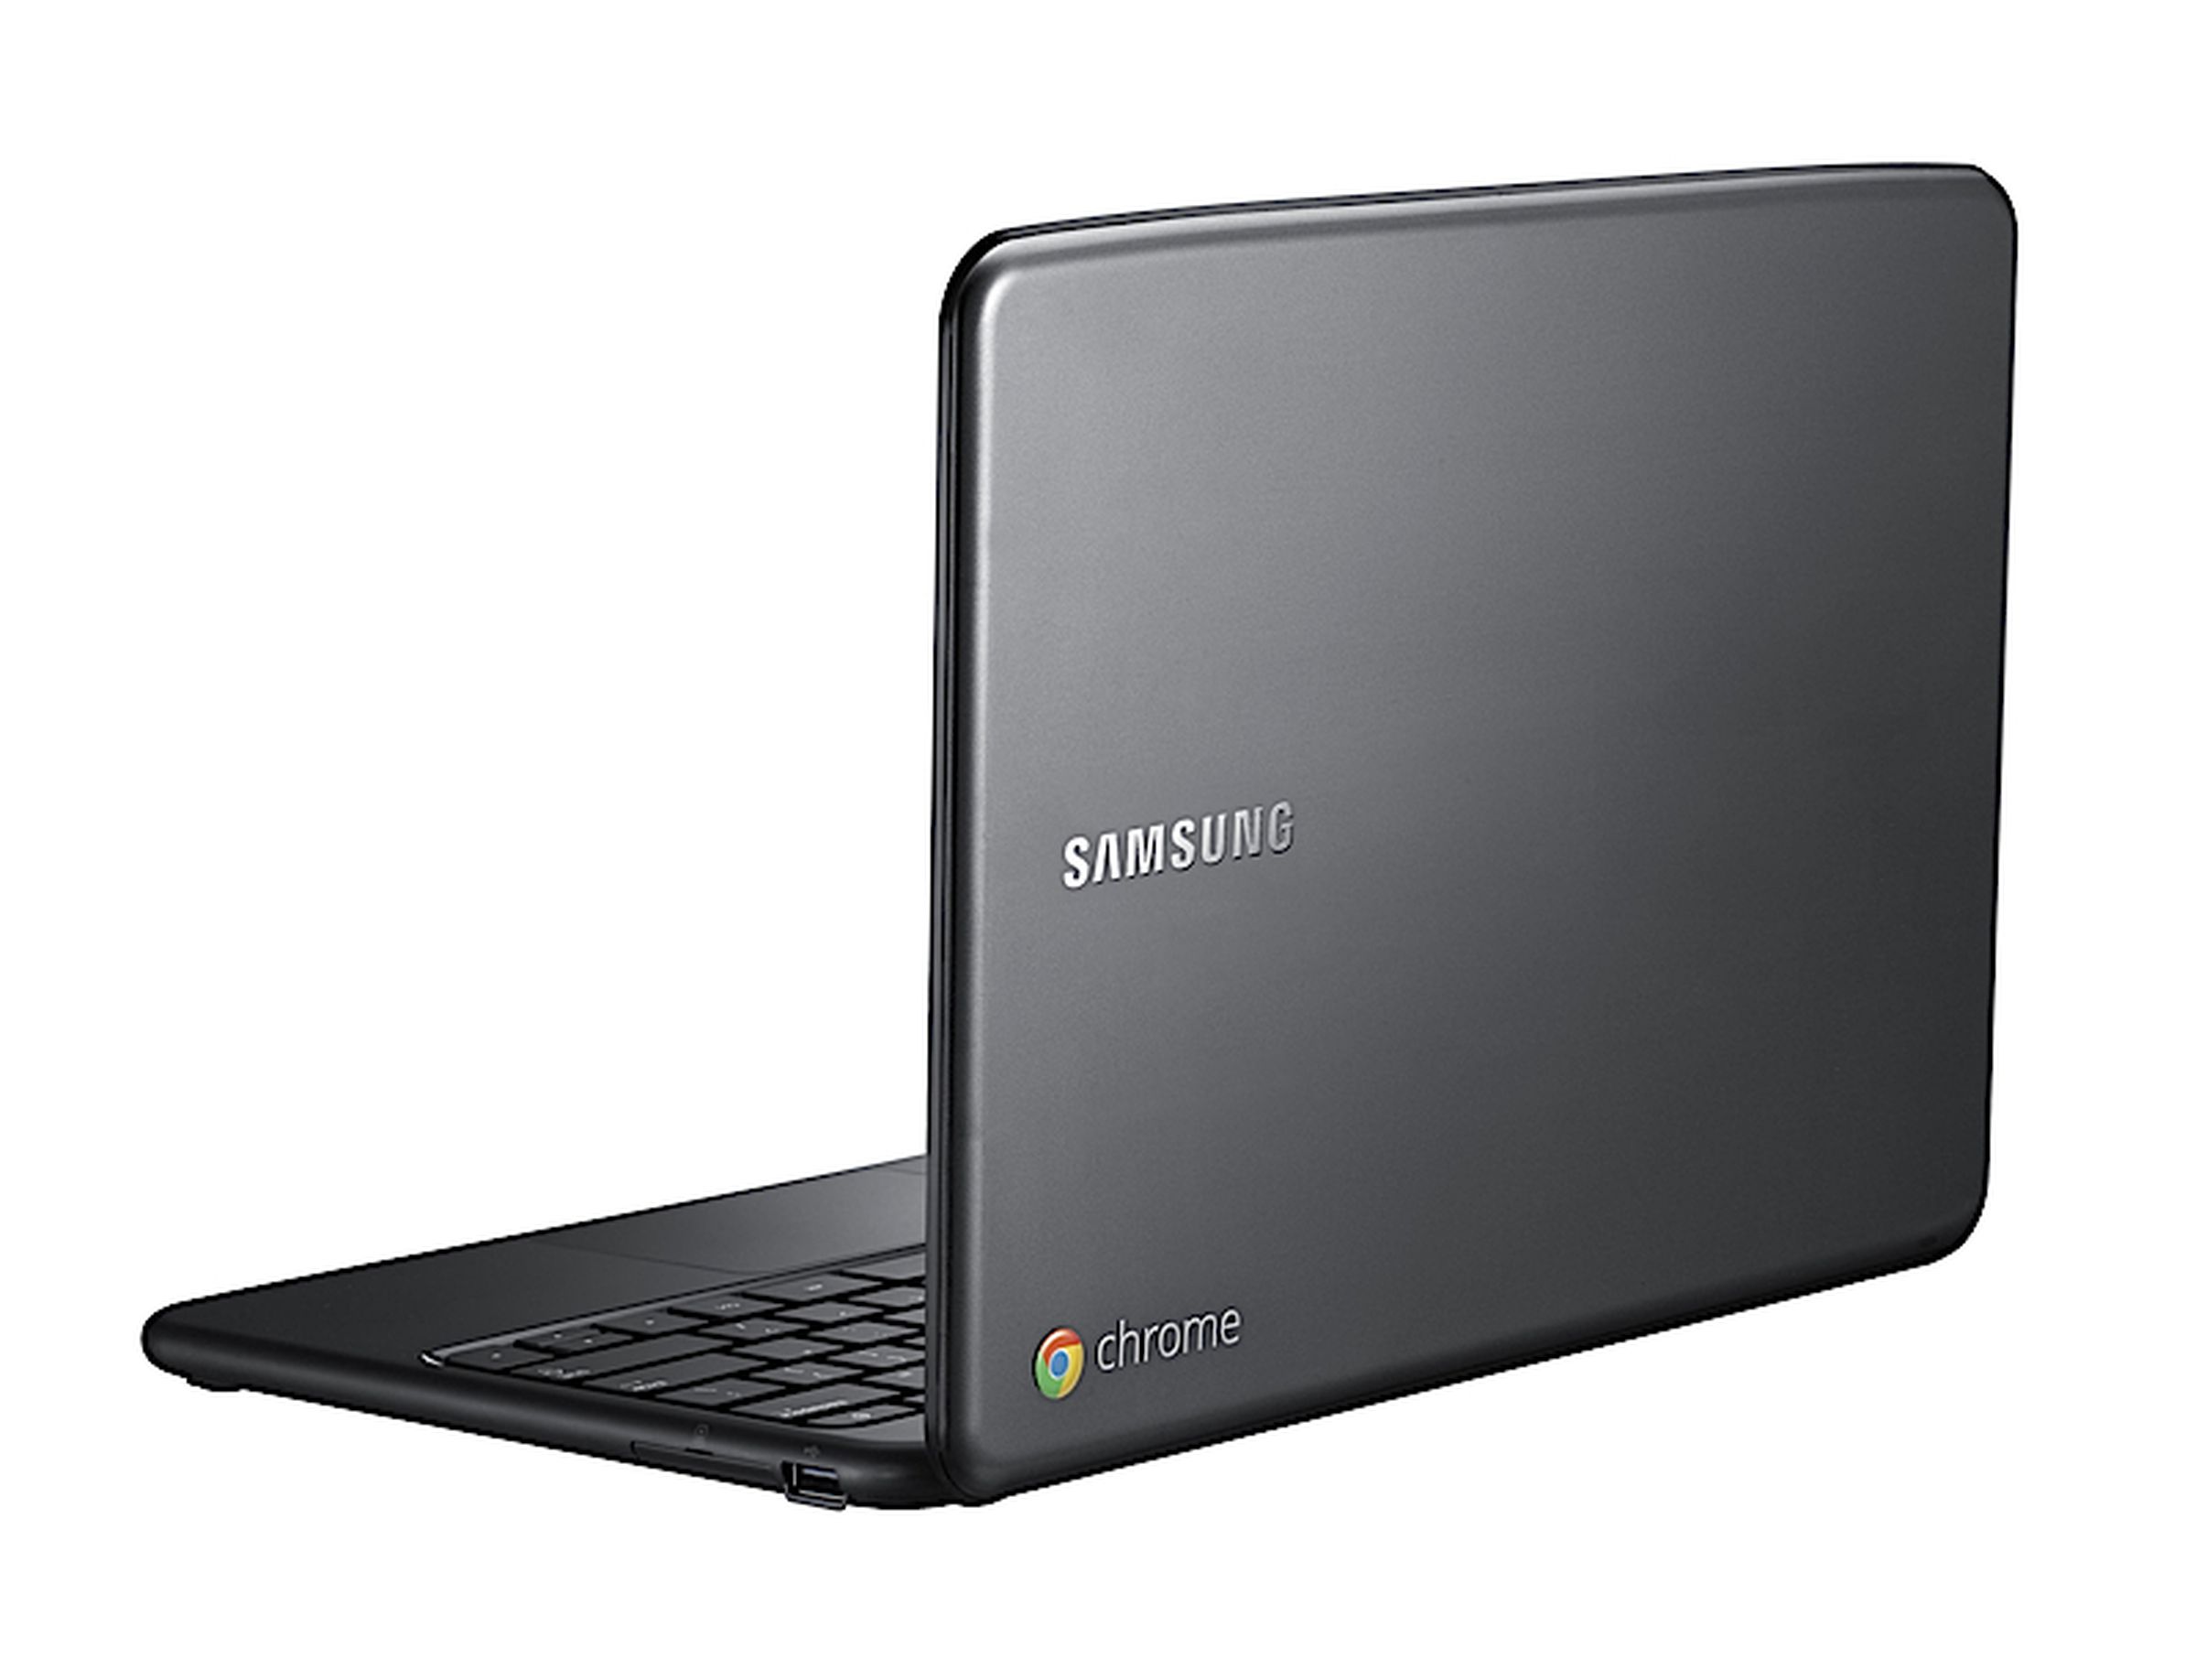 Samsung Series 5 Chromebook pictures